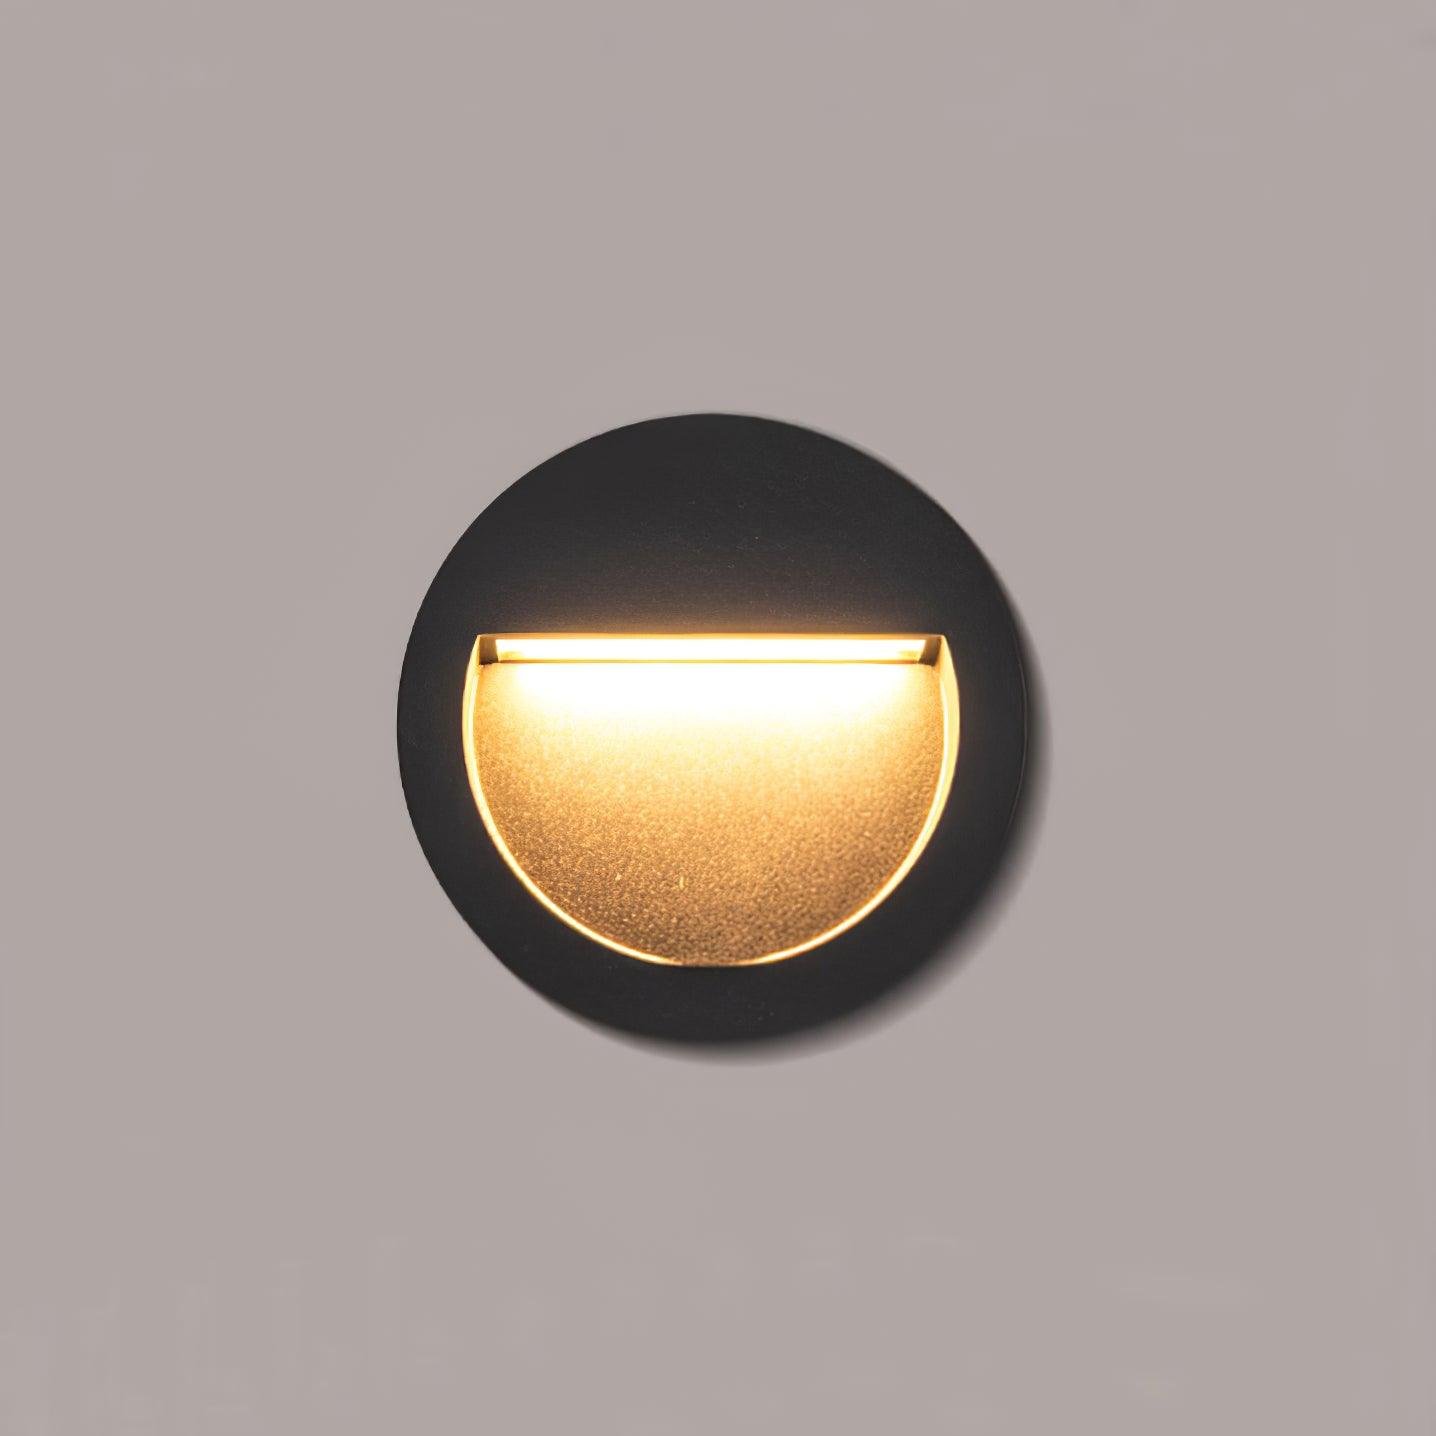 Set of 10 Step and Wall Lights, Model A: Diameter 4.6 inches x Height 4.6 inches (11.8cm x 11.8cm), Cool Light